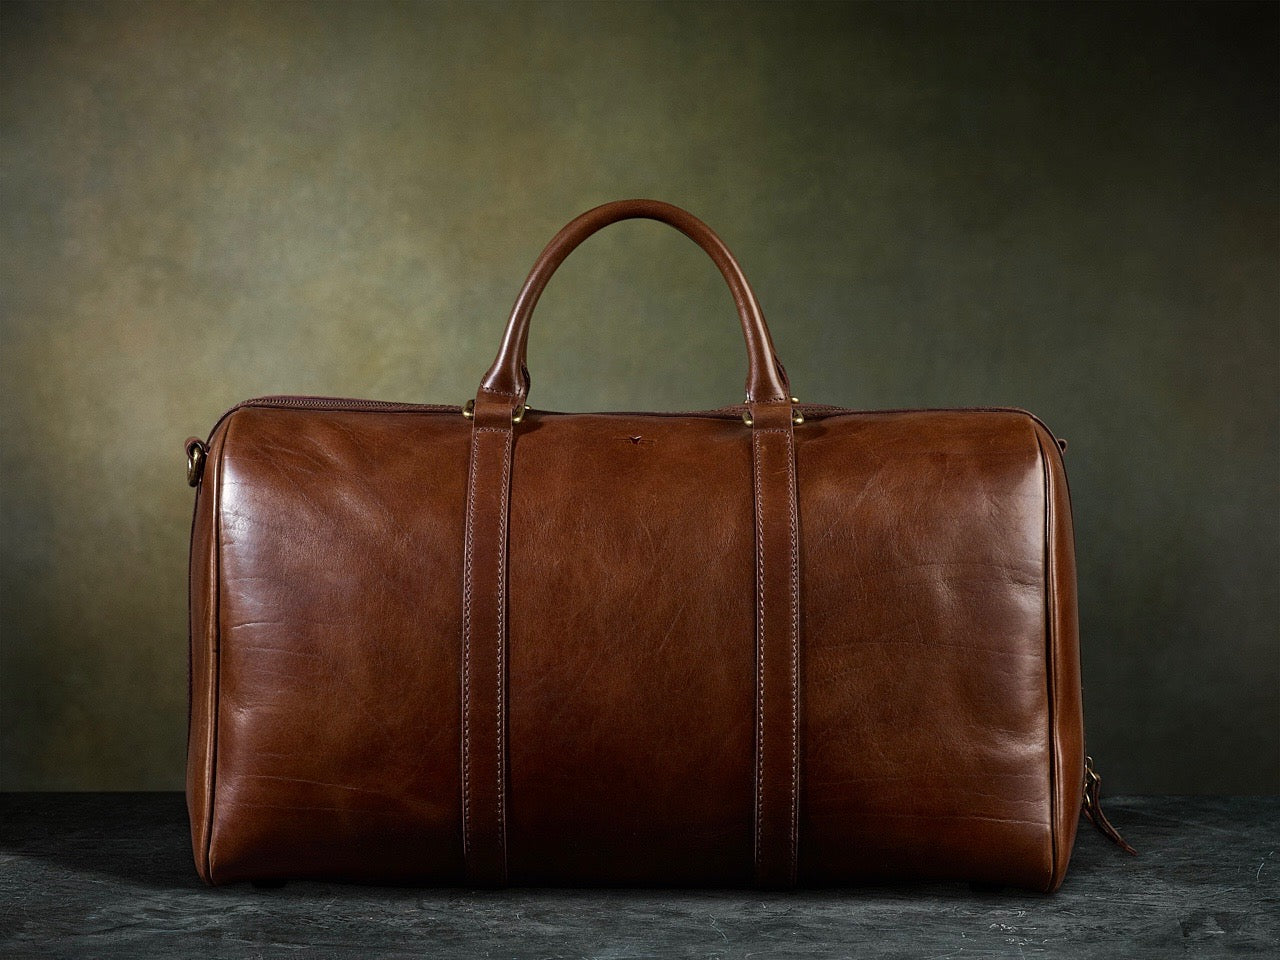 LEATHER TRAVEL BAG Leather Travel Duffle Bag Mens Leather 